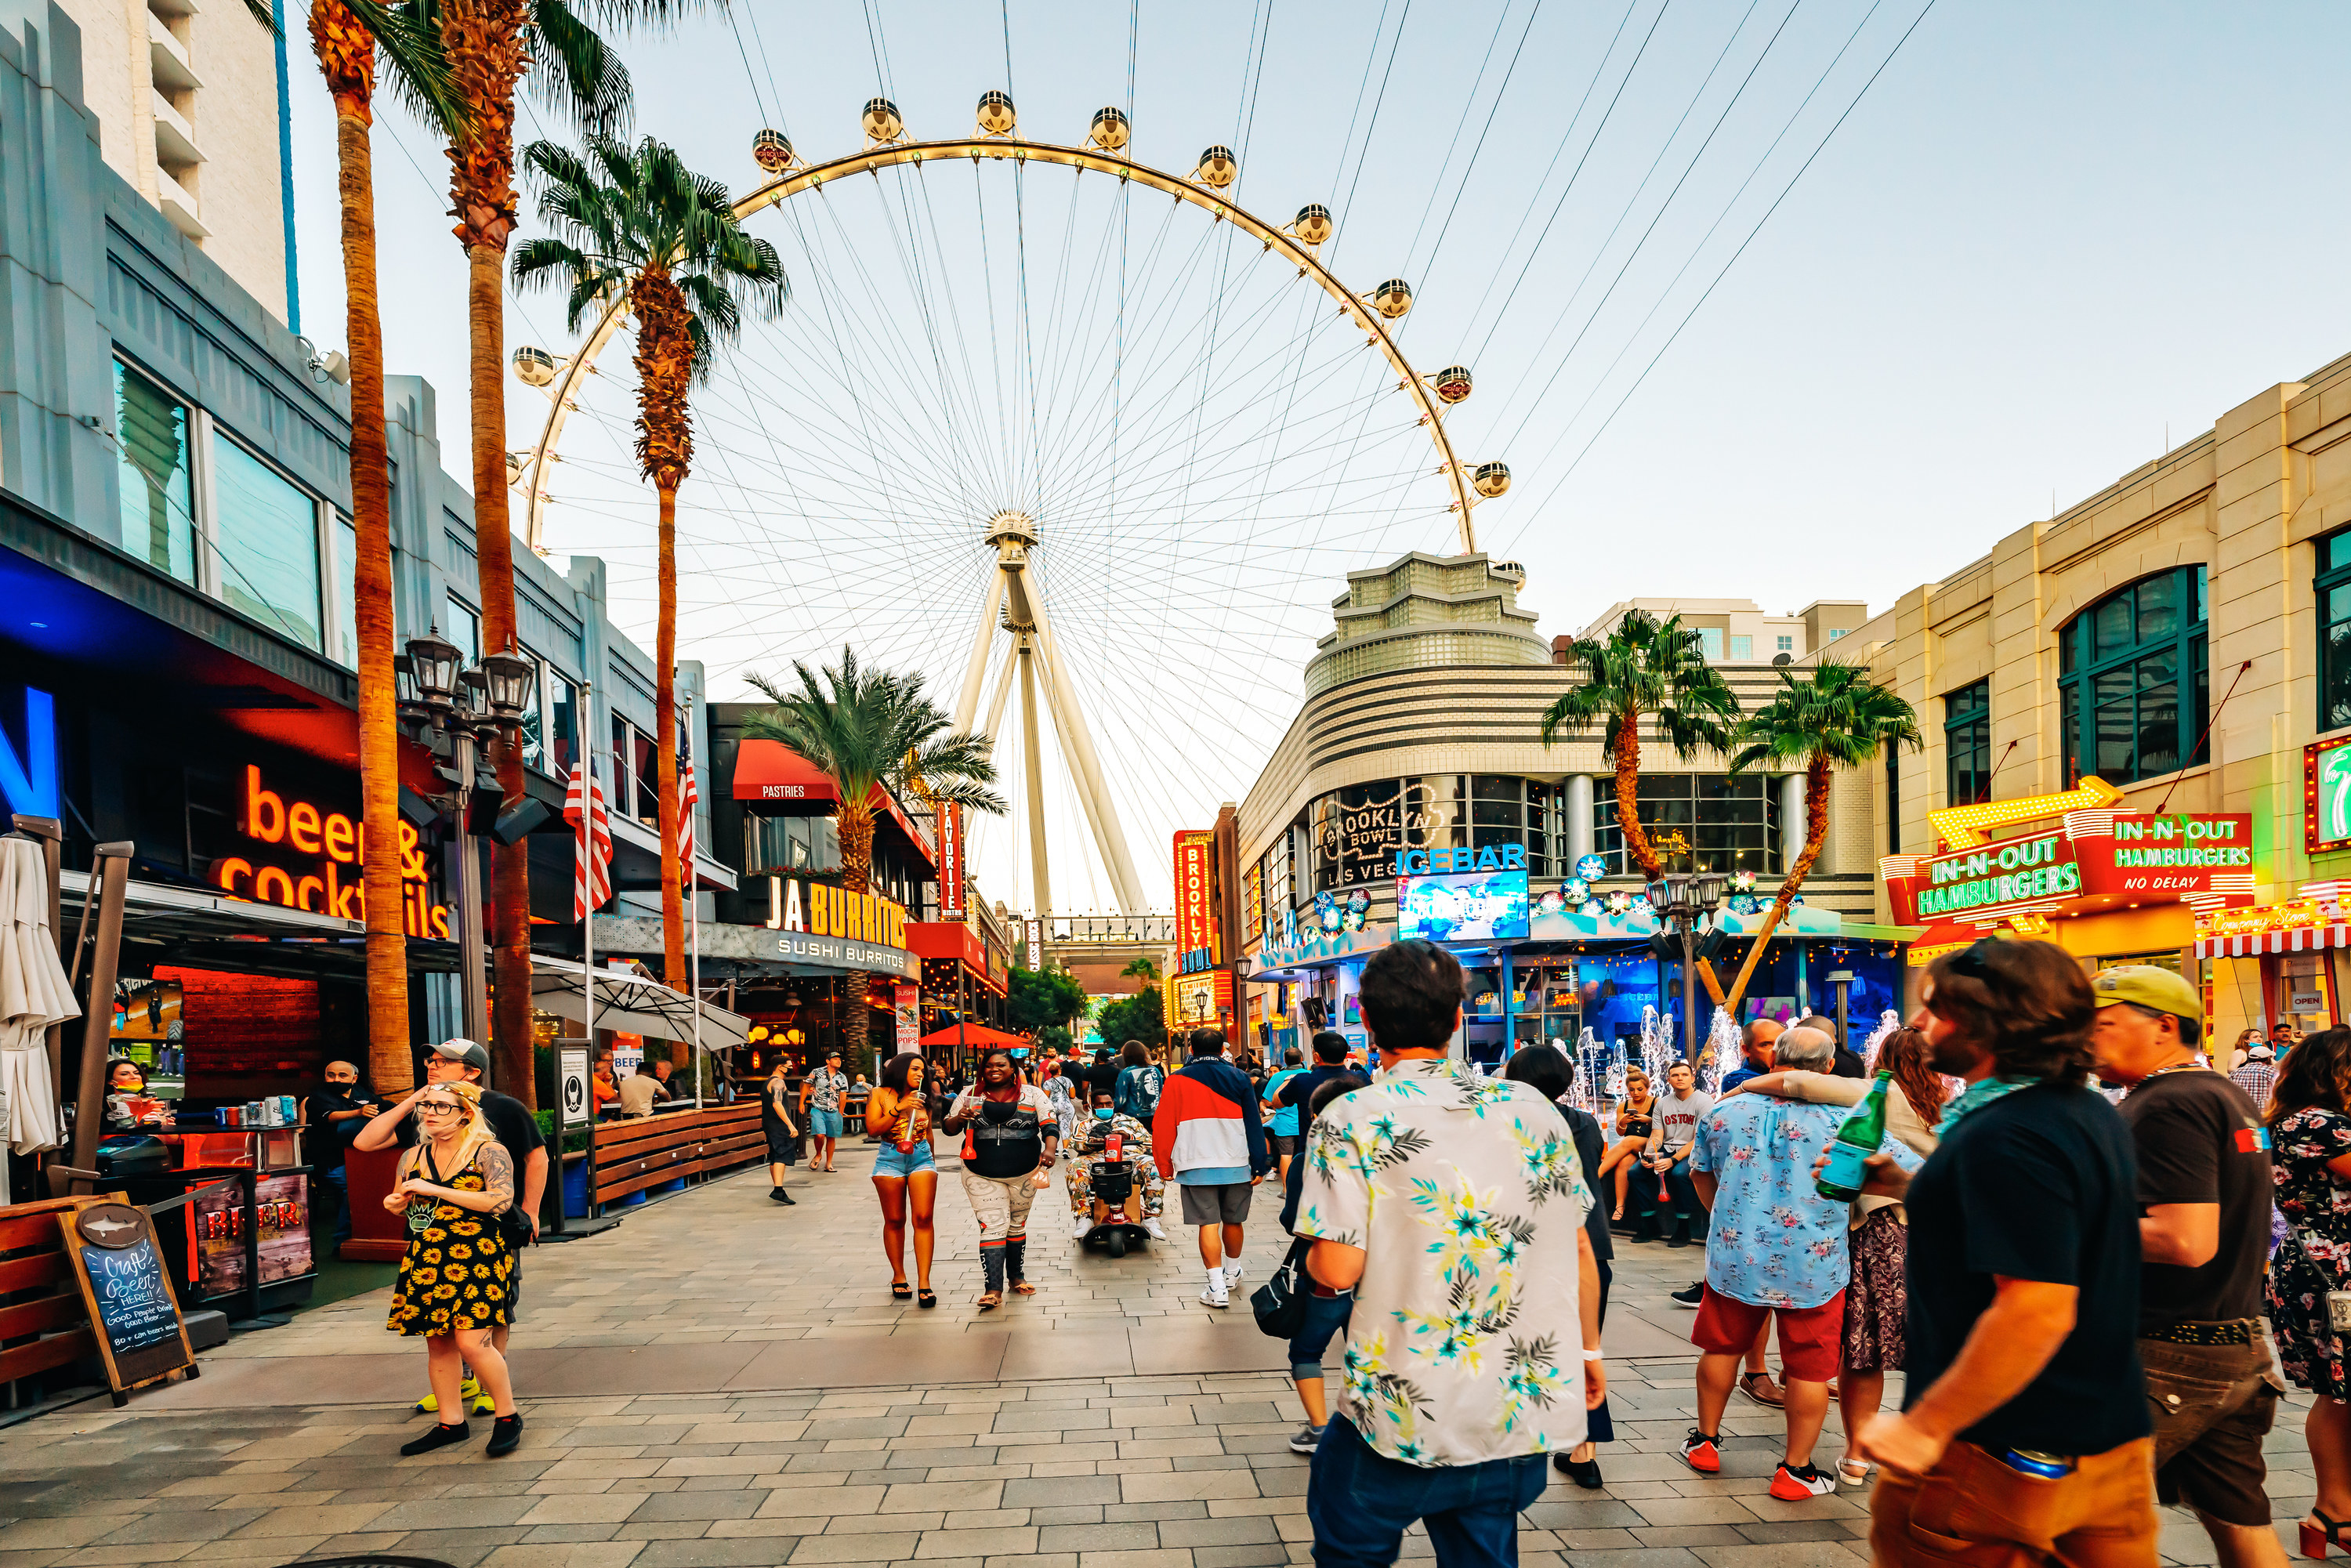 People walk in front of the ferris wheel at the Las Vegas strip on a sunny day